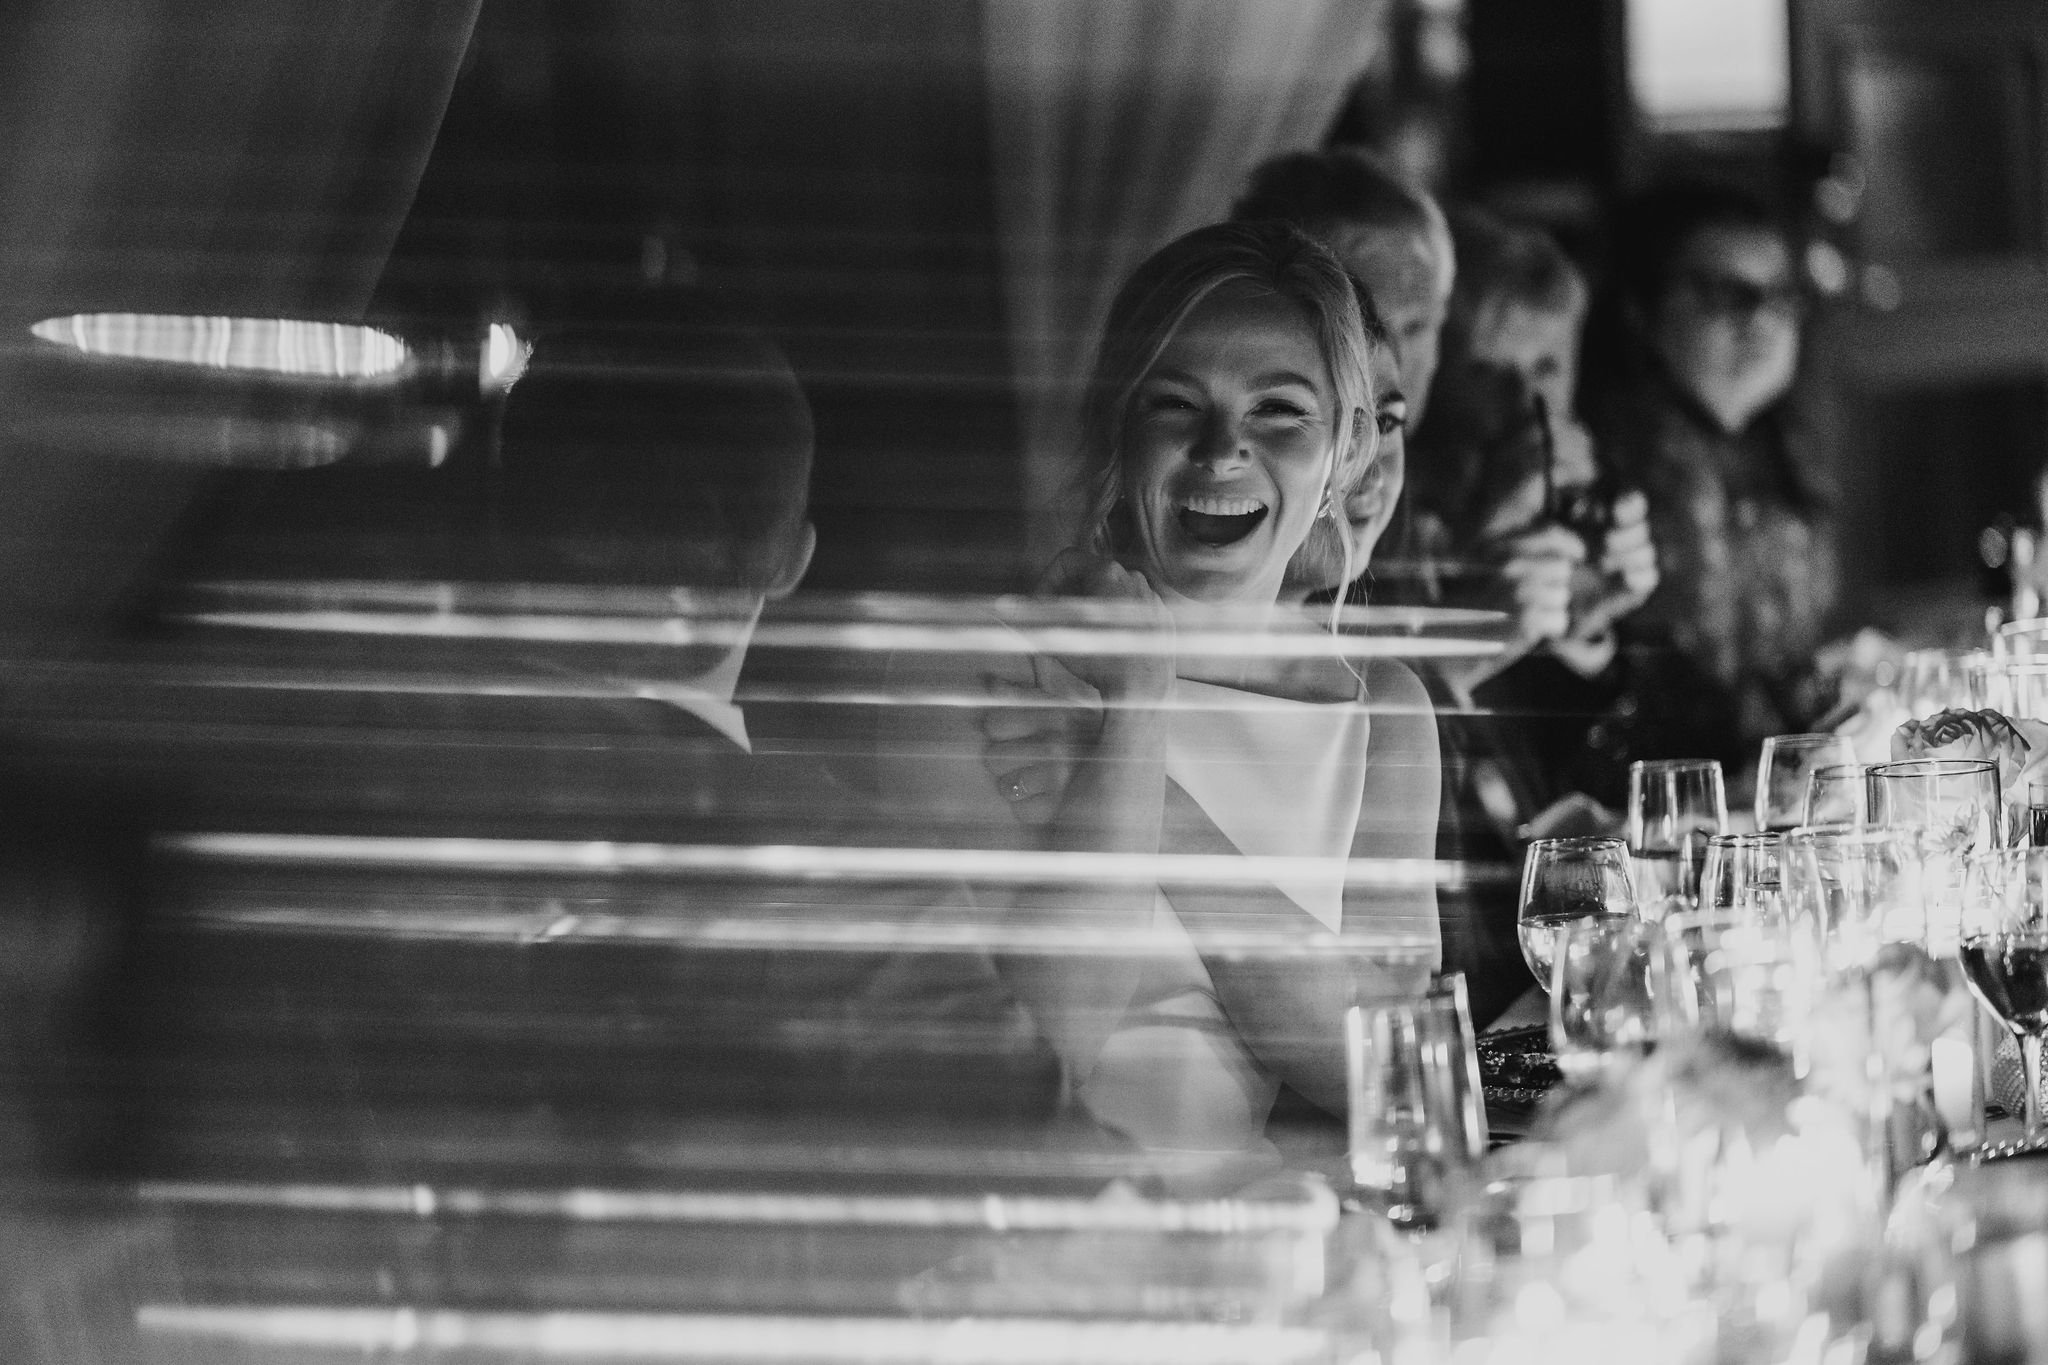 artistic black and white candid wedding photo